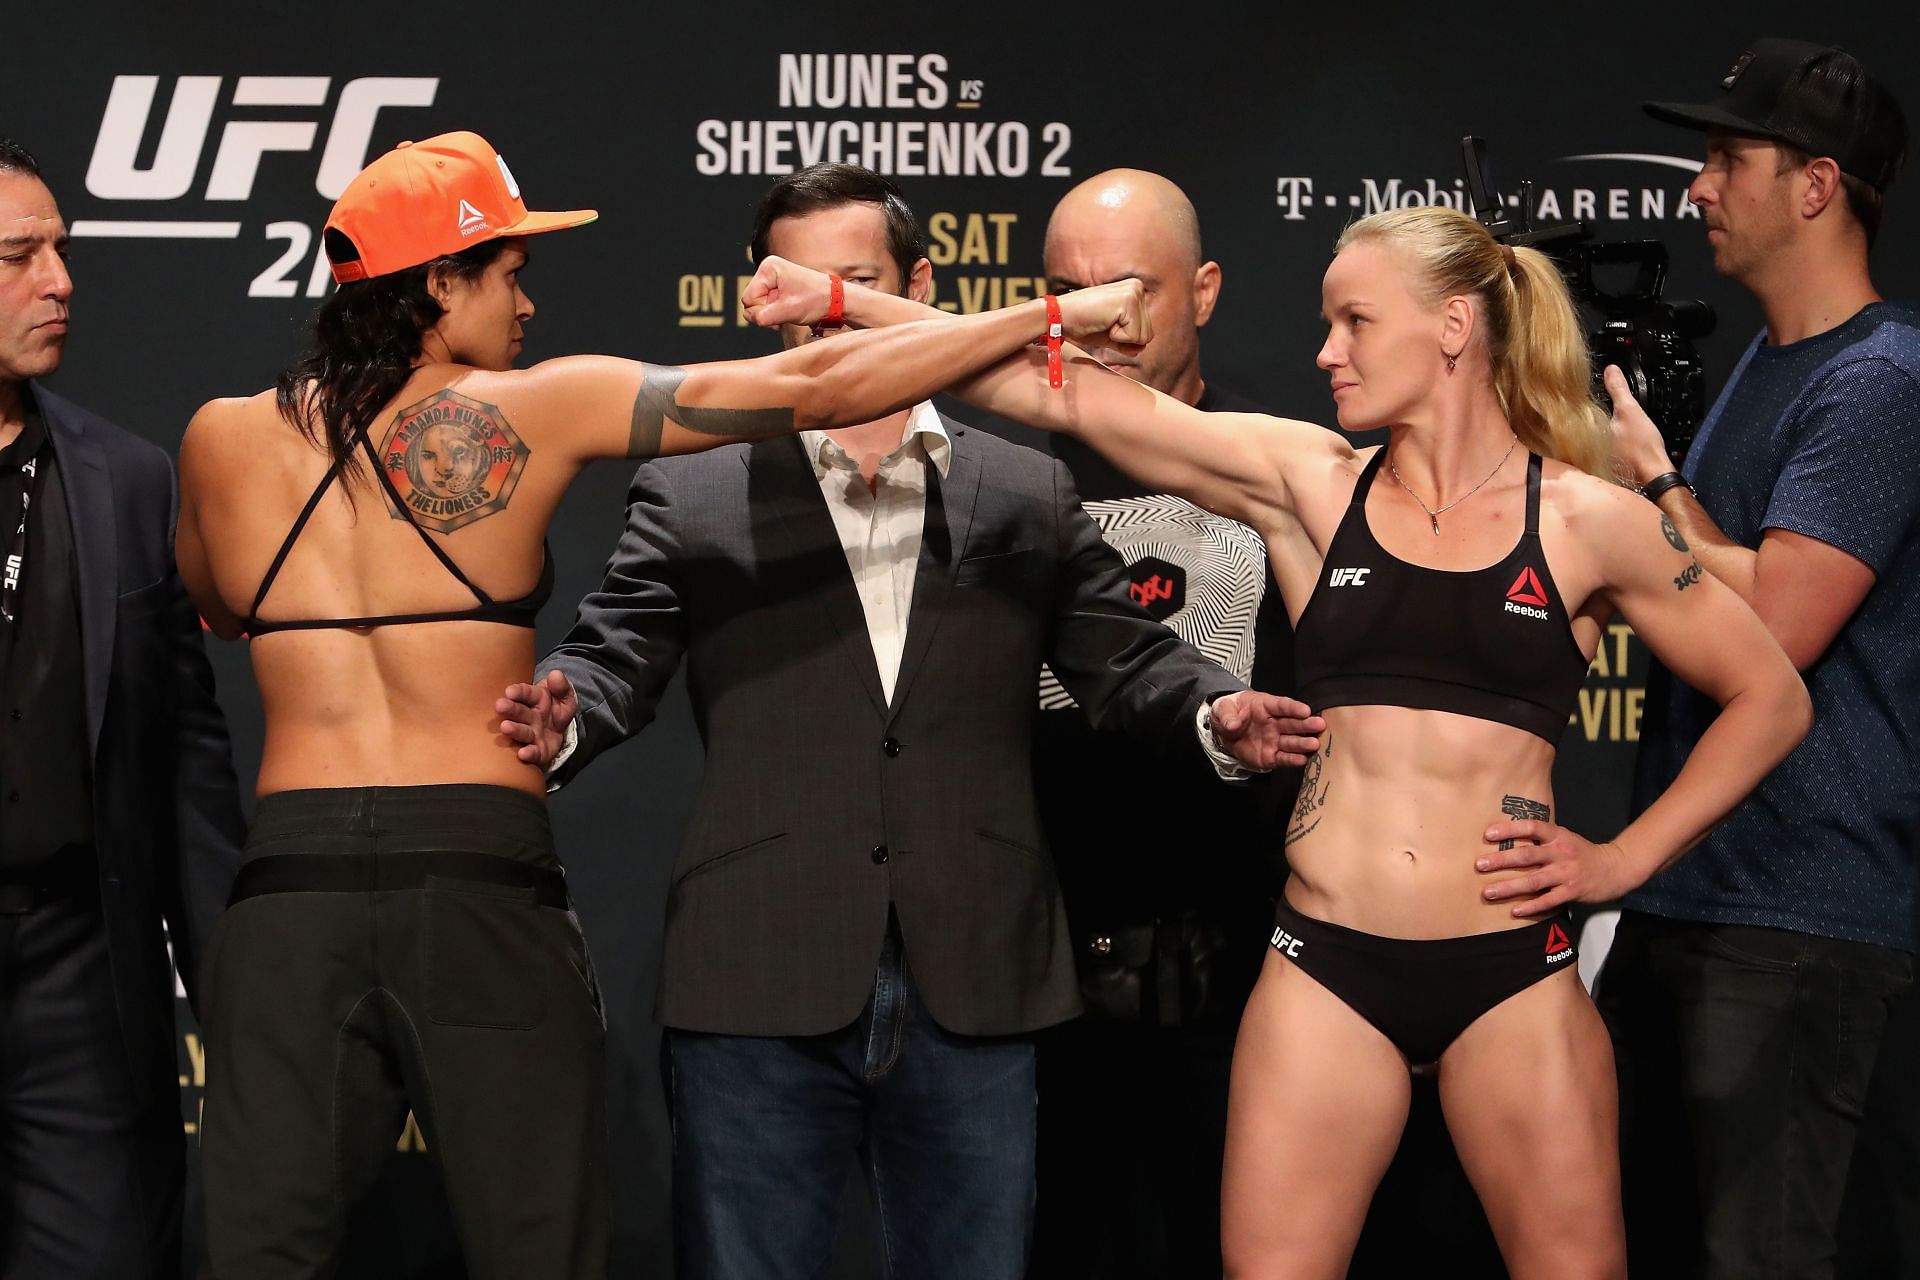 Had Nunes won on Saturday, many would have called for Nunes vs. Shevchenko III